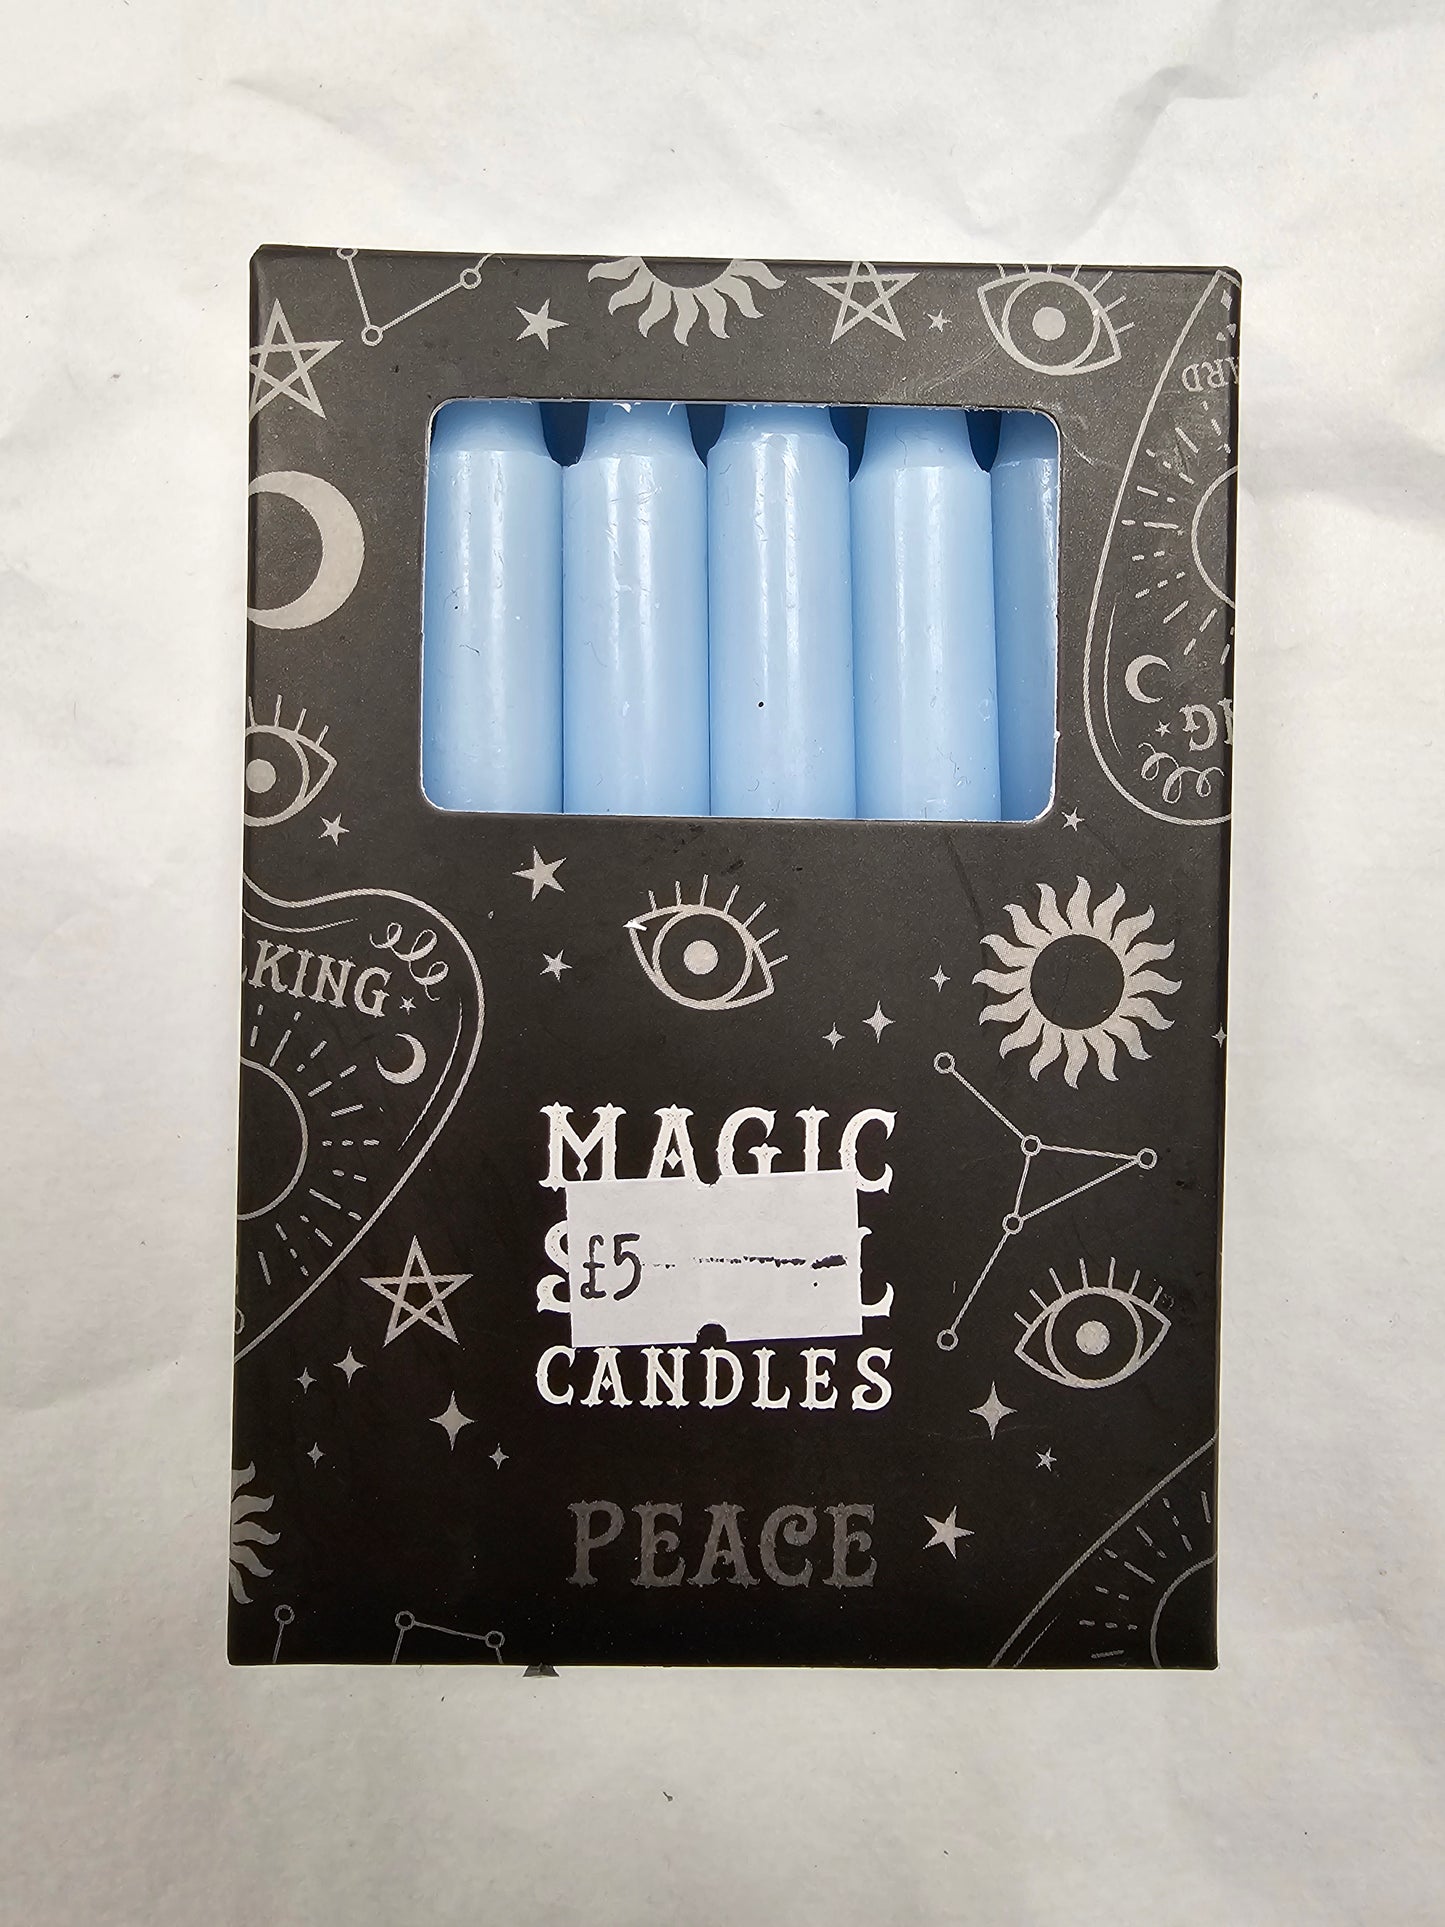 Blue spell candles (peace)